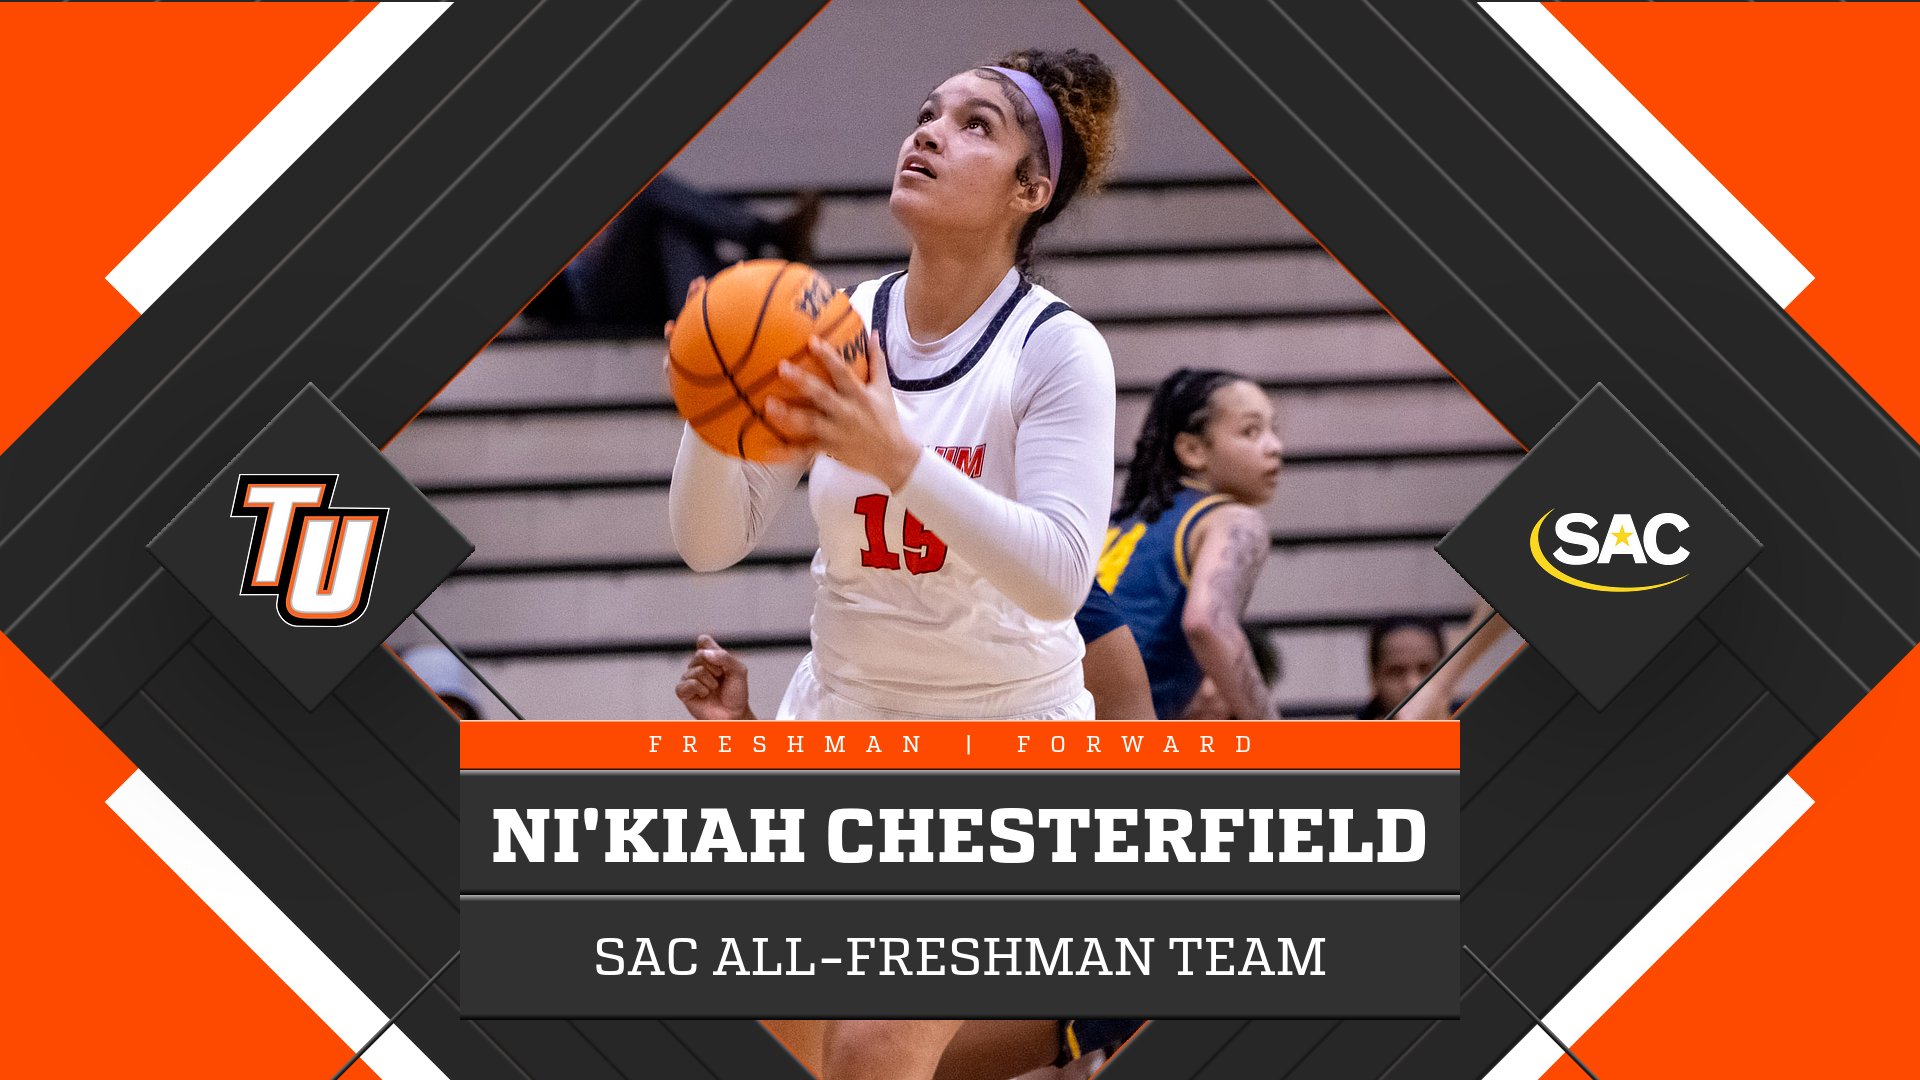 Chesterfield selected to SAC All-Freshman Team